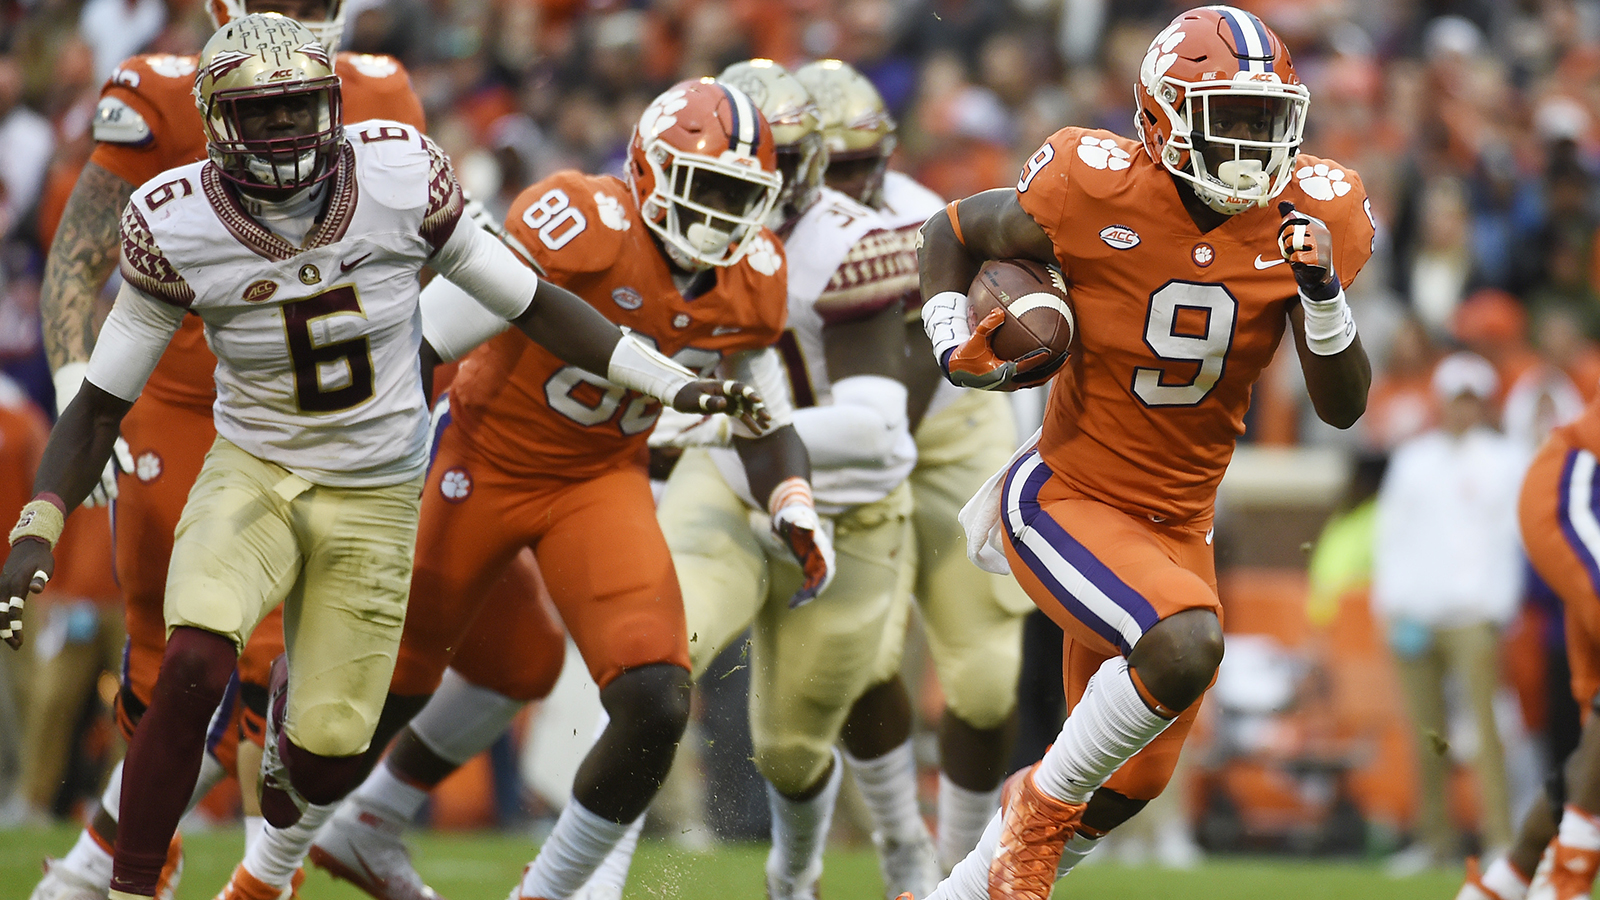 FSU makes push late, but is no match for Clemson in road loss